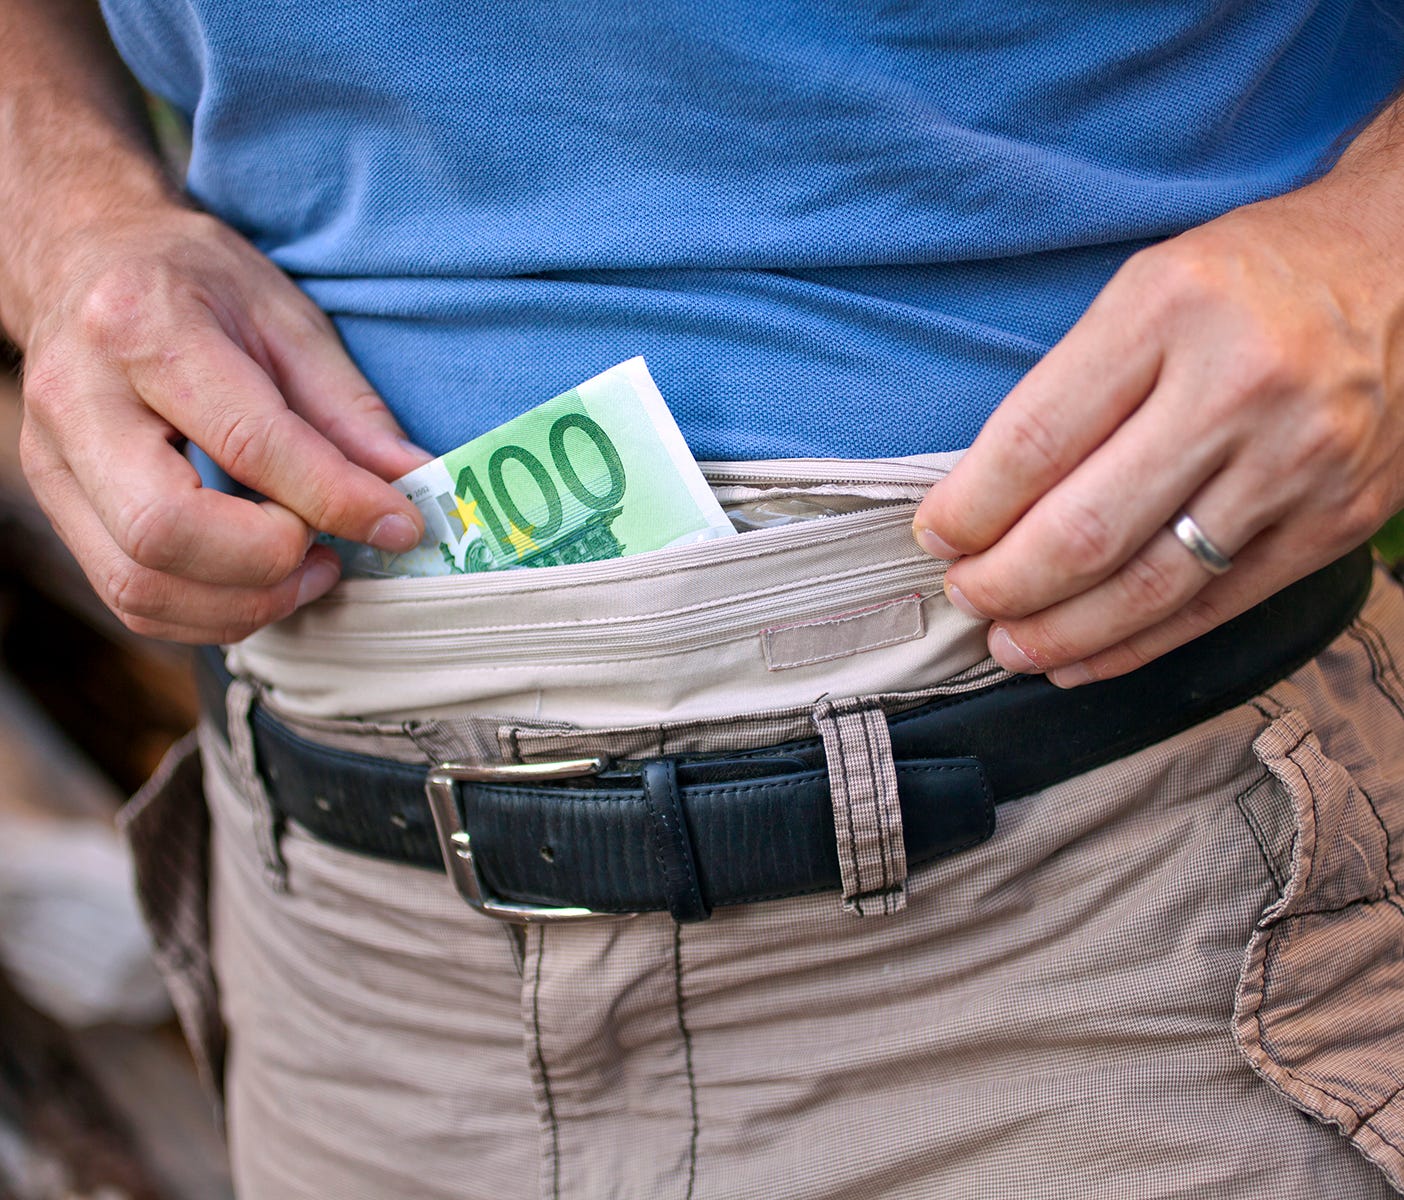 Rick Steves recommends wearing a moneybelt tucked underneath your clothes for security (he wasn't when he was pickpocketed.